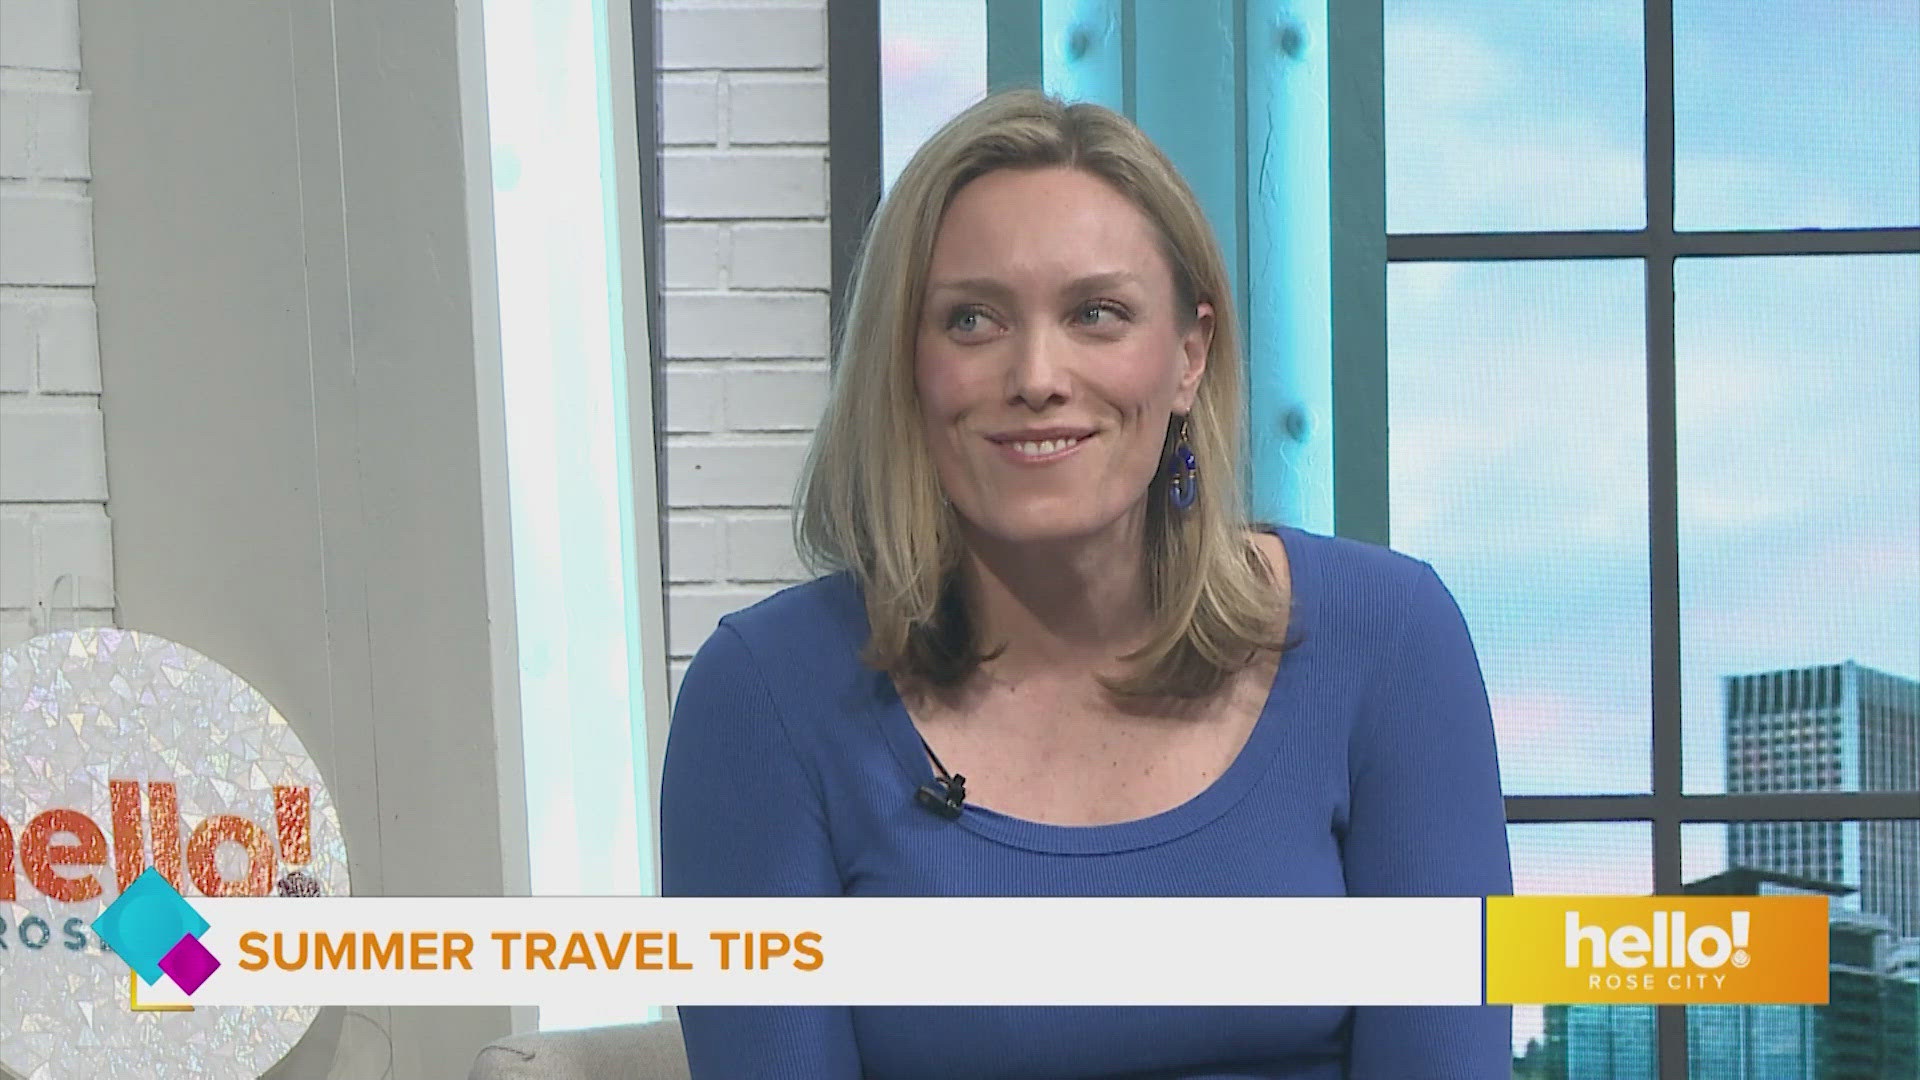 Get ideas for places to visit both near and far from travel expert Rachel Rudwall.